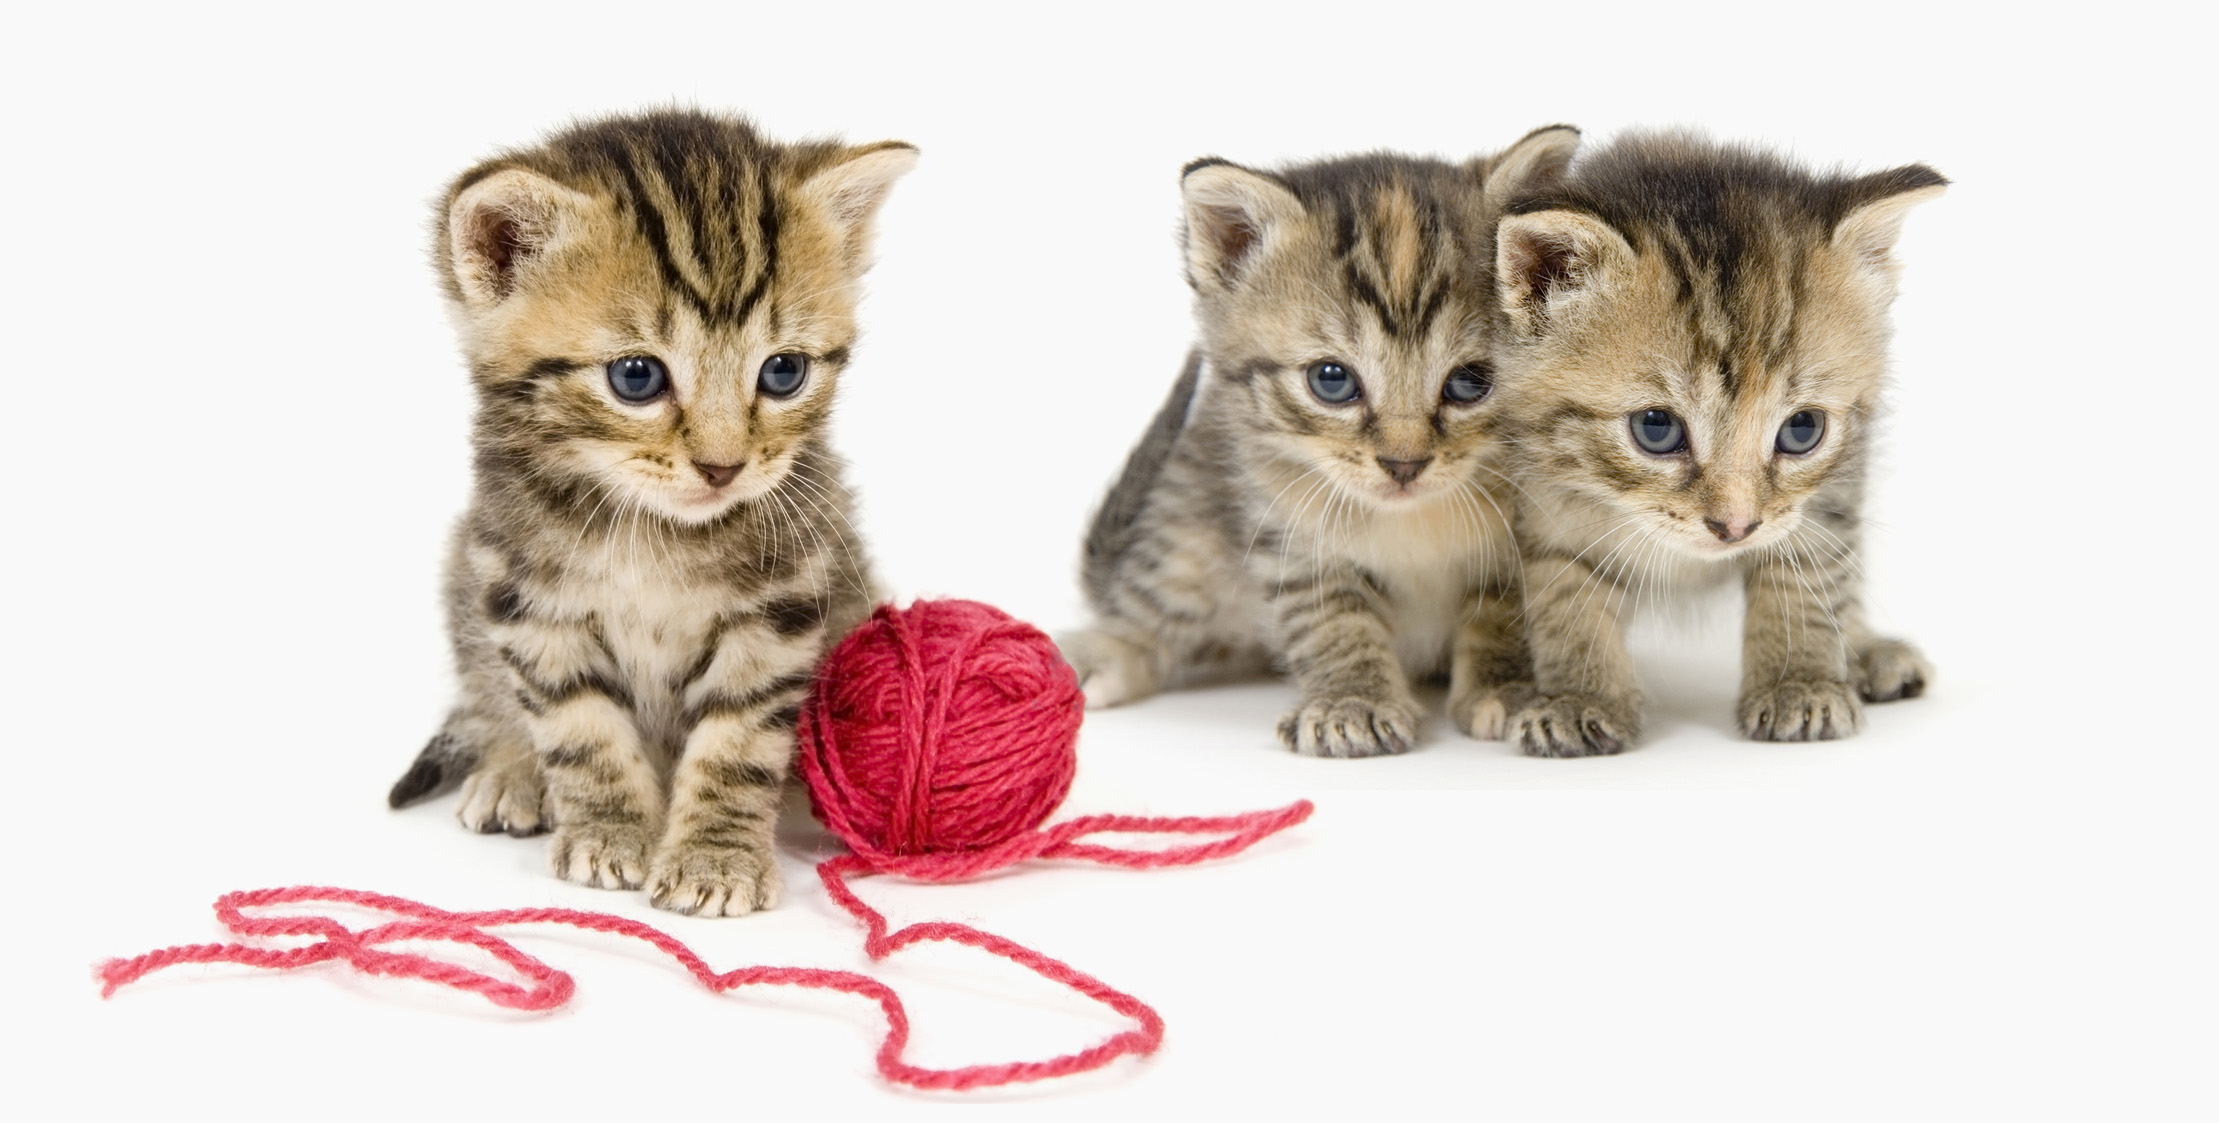 A small kitten sits next to a ball of red yarn on a white background. These kittens are being raised on a farm in central Illinois